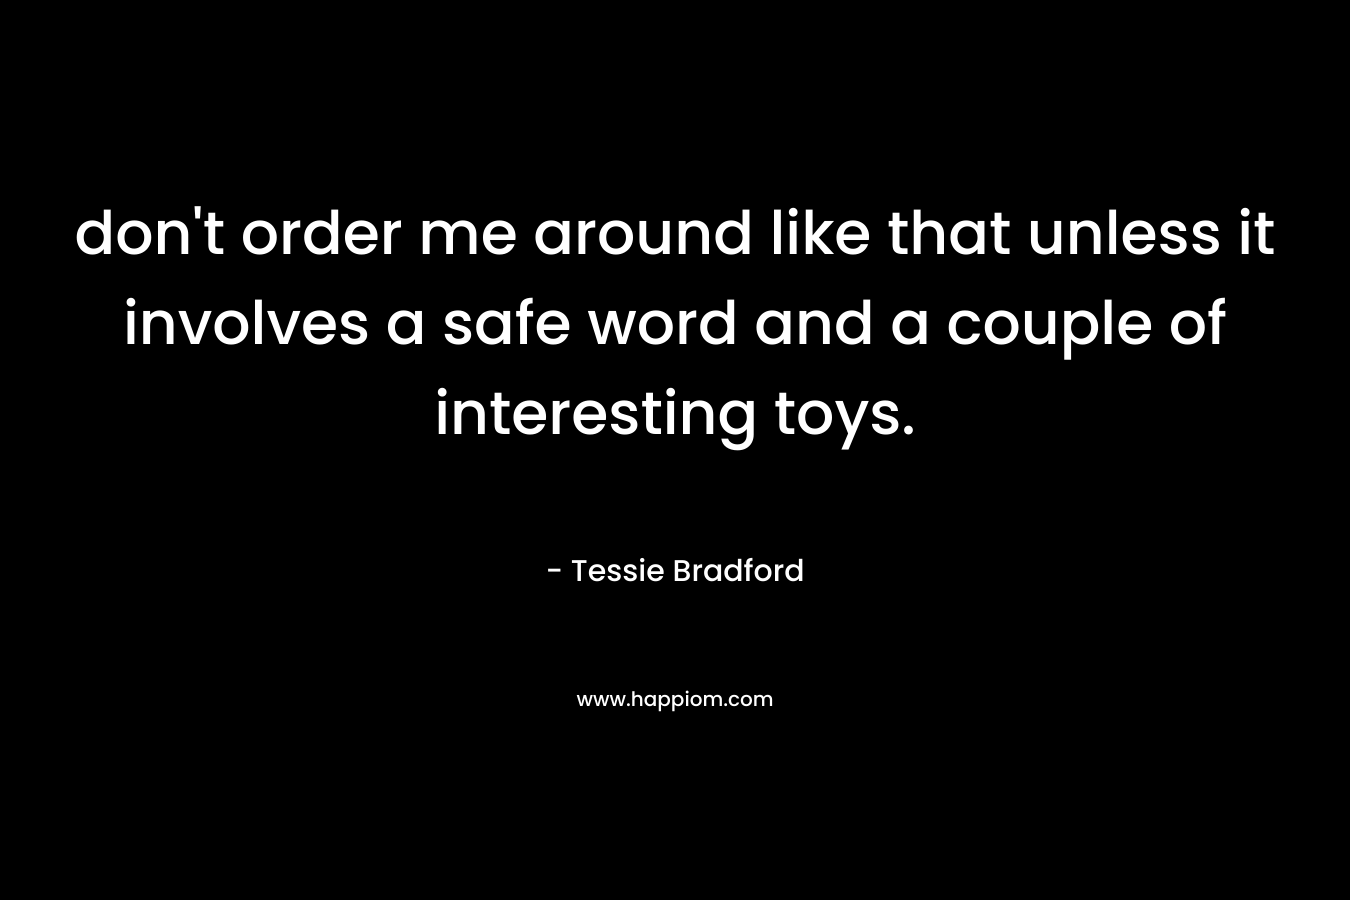 don’t order me around like that unless it involves a safe word and a couple of interesting toys. – Tessie Bradford